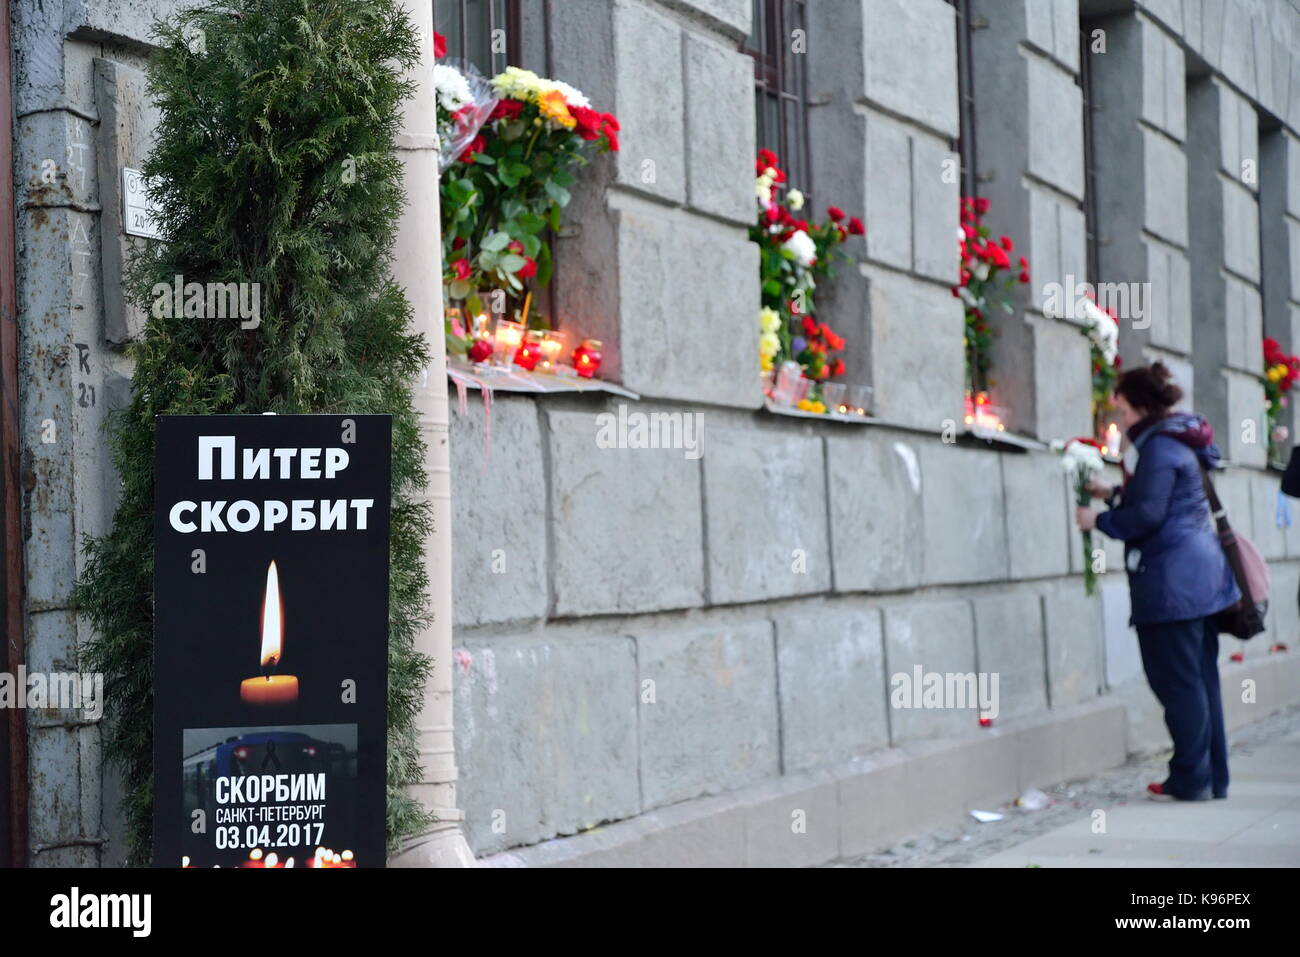 ST.PETERSBURG, RUSSIA - APRIL 06, 2017:  Mourning poster PETER MOURNS the victims of the terrorist attack on 3 April 2016 at the metro Institute of Te Stock Photo